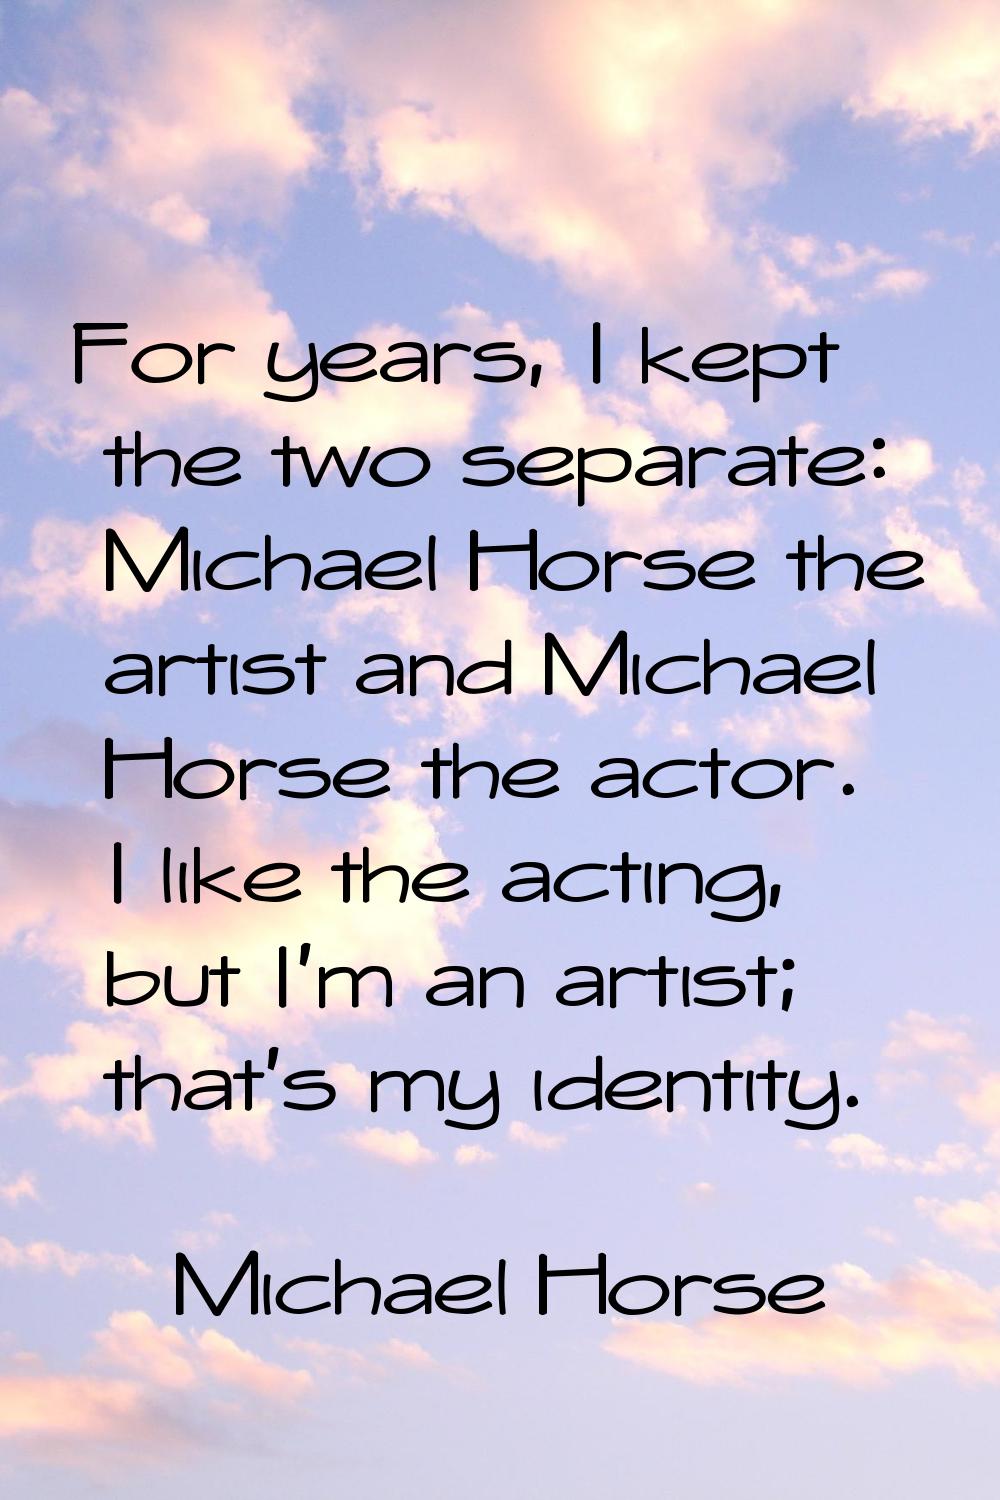 For years, I kept the two separate: Michael Horse the artist and Michael Horse the actor. I like th